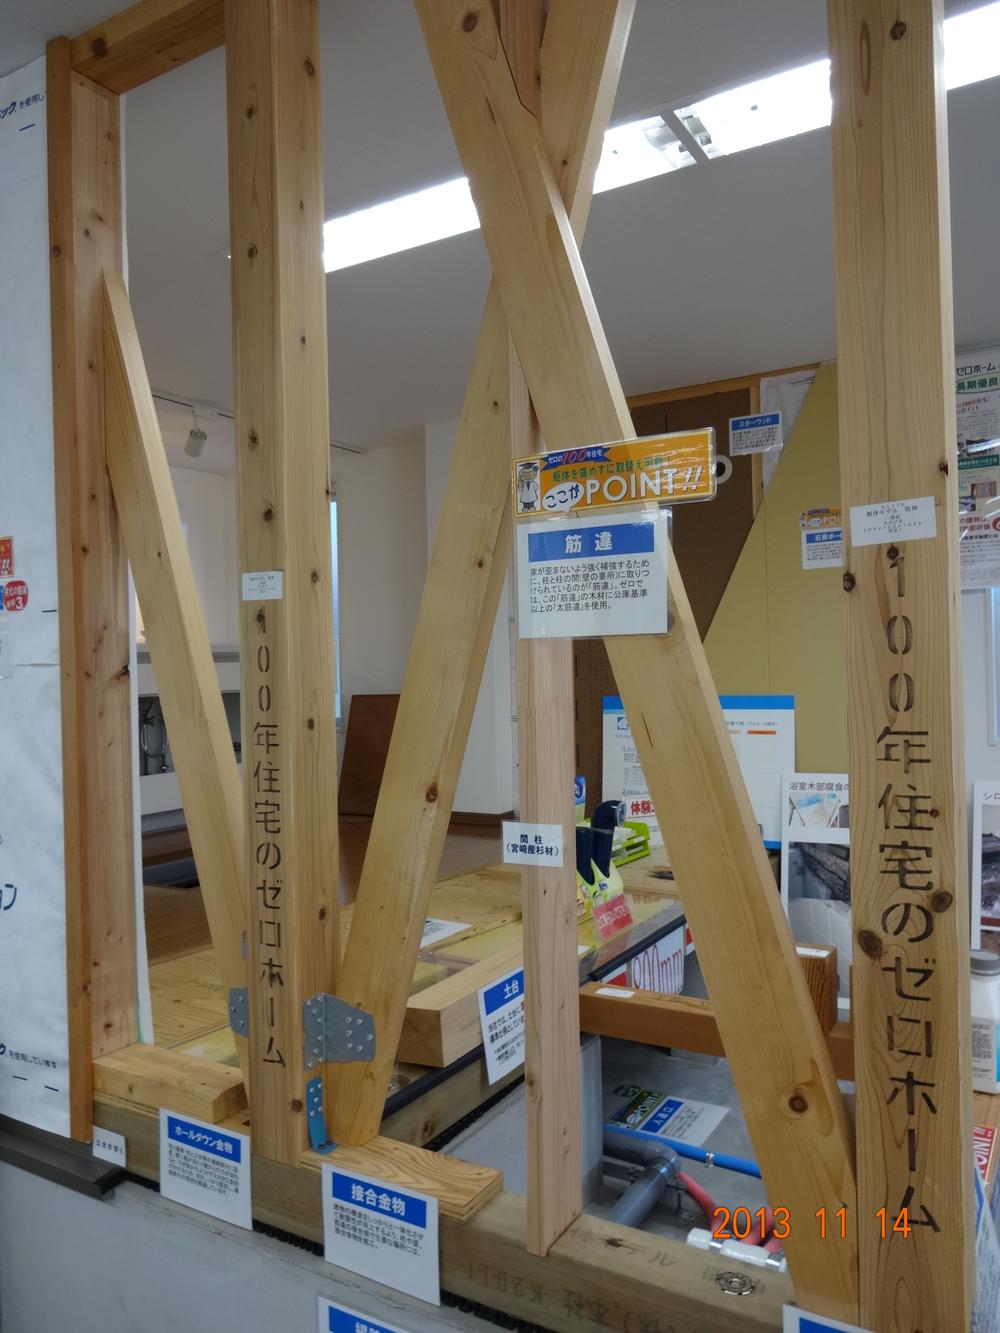 Construction ・ Construction method ・ specification. In order to reinforce strongly so that the house is not distorted, Brace that is attached between the pillars (the wall of the key points). We are using a "thick brace" in the Company wood of this brace.